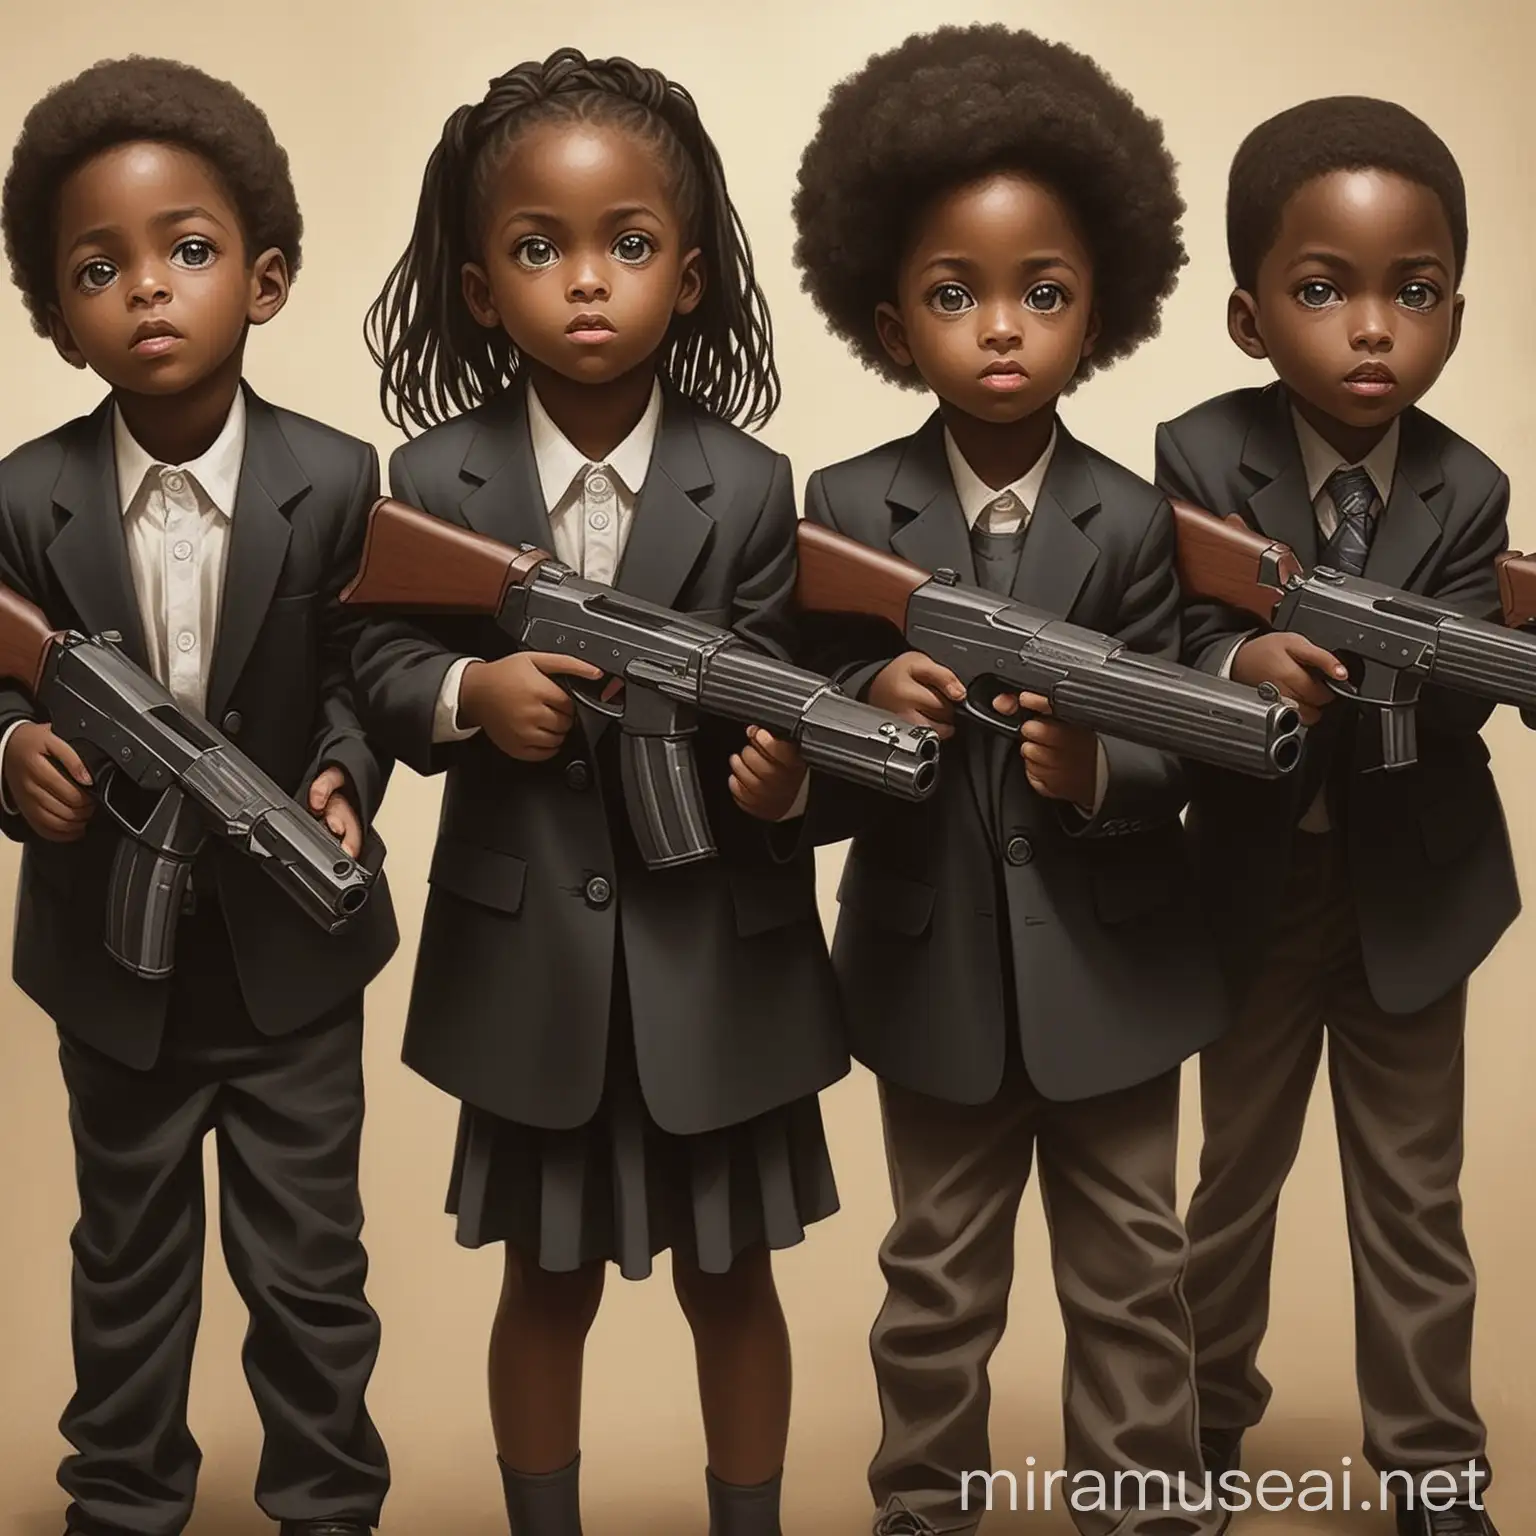 African American Children Playing with Toy Guns in Urban Playground